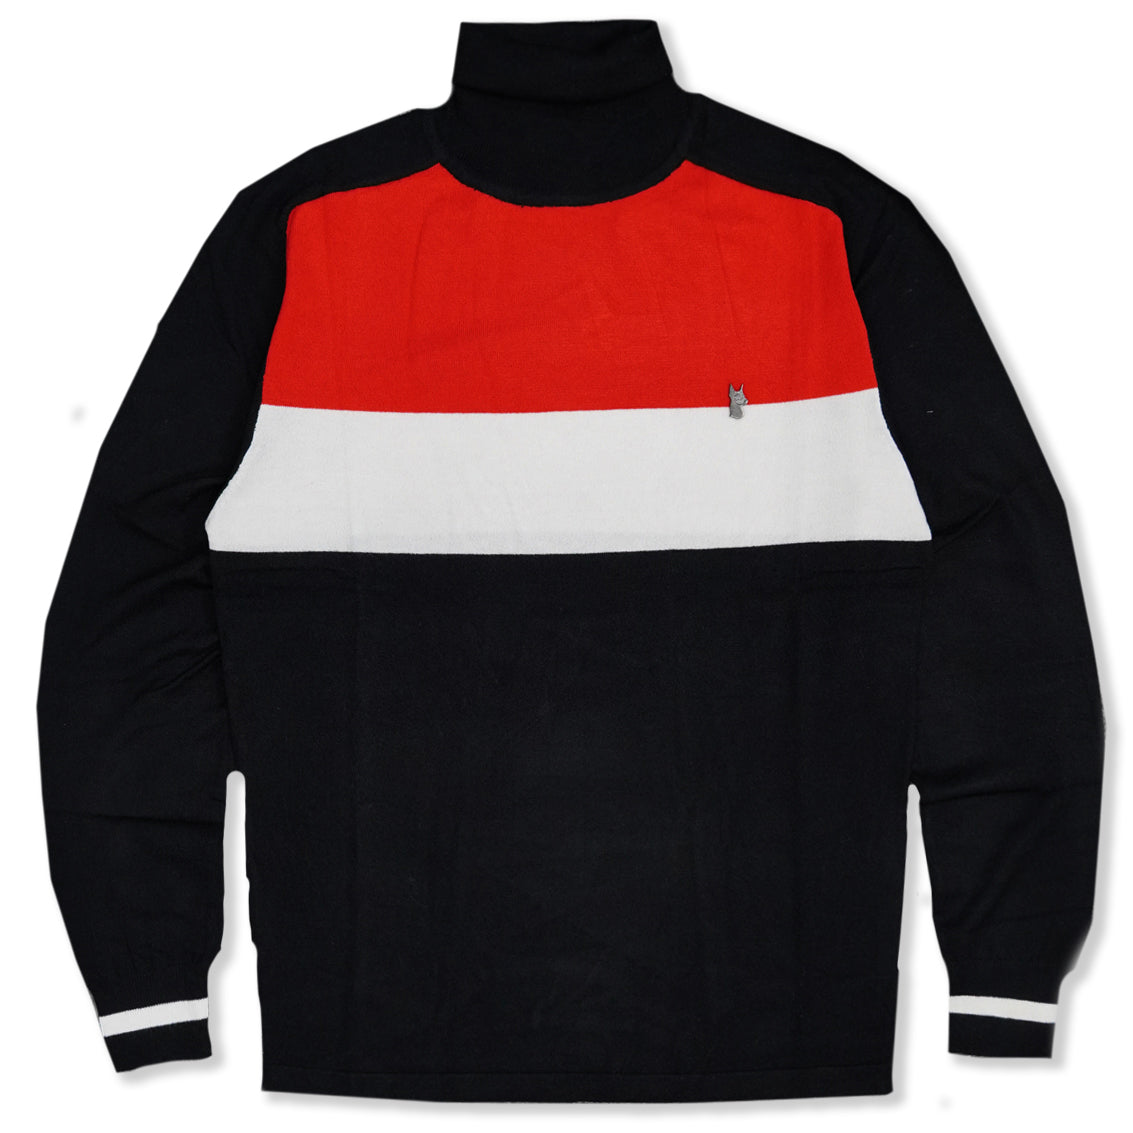 M4000 Turtle neck Knit Sweater - Black/Red